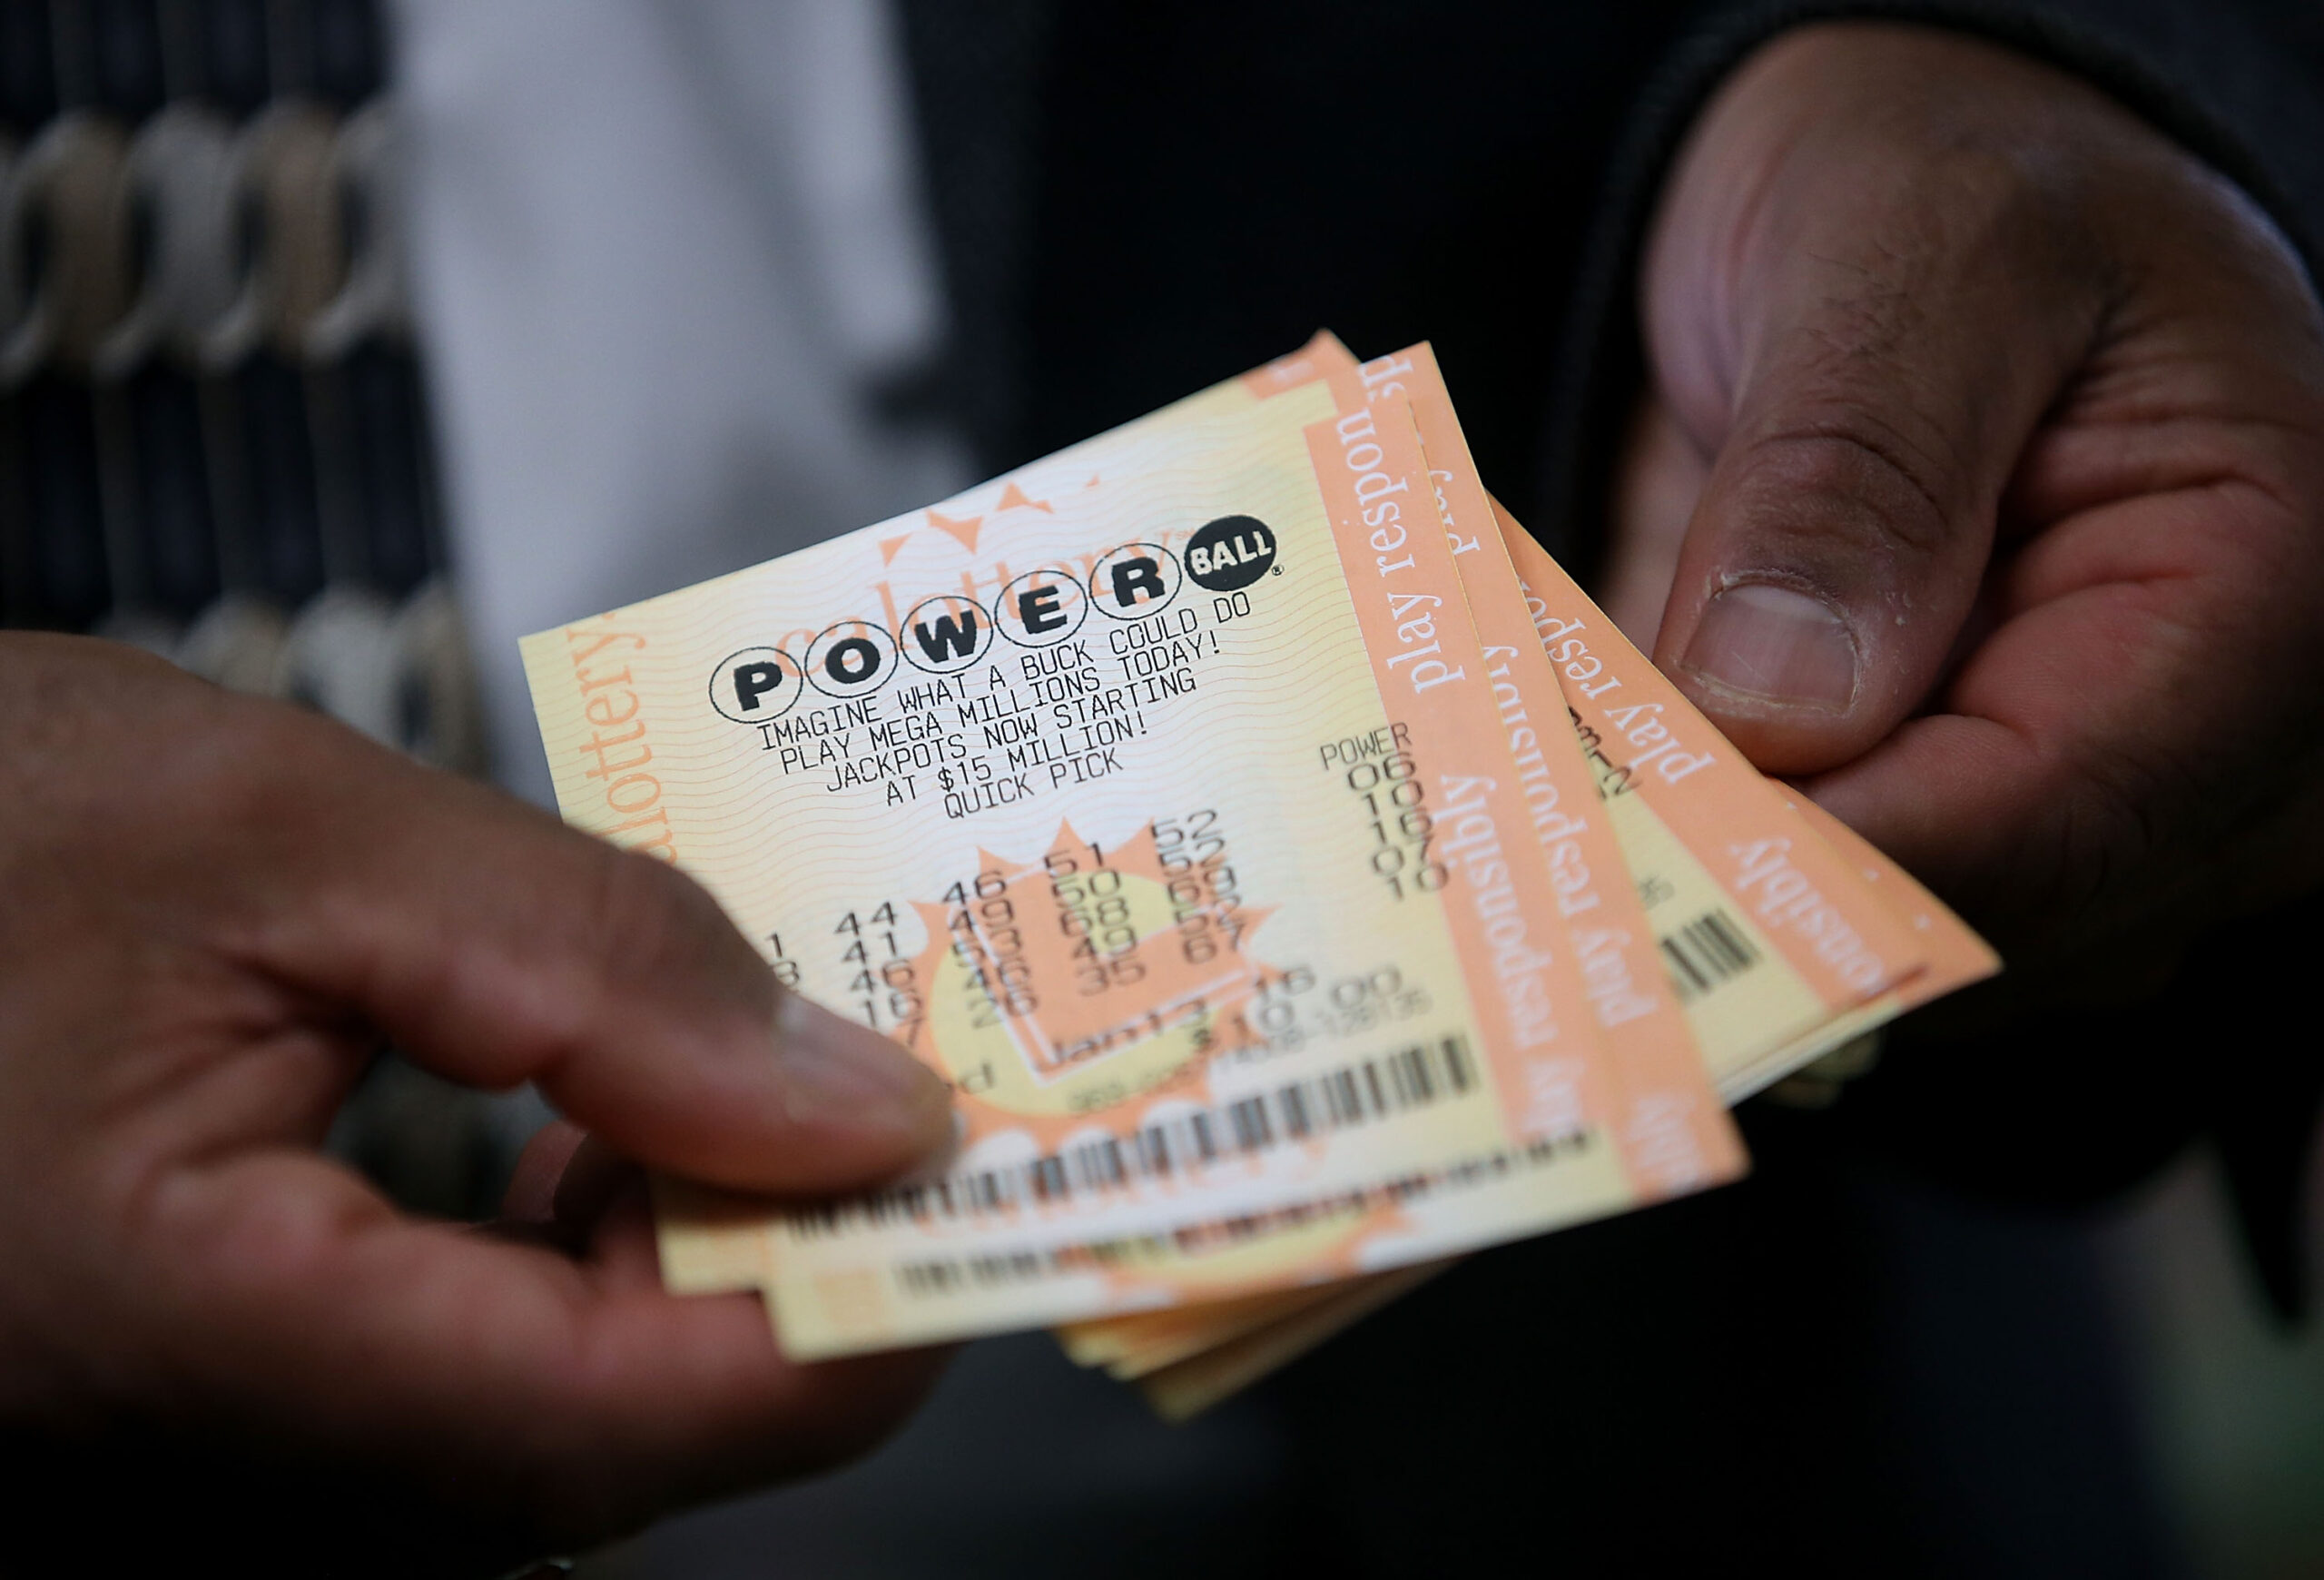 Powerball - browse a lot of concerns It